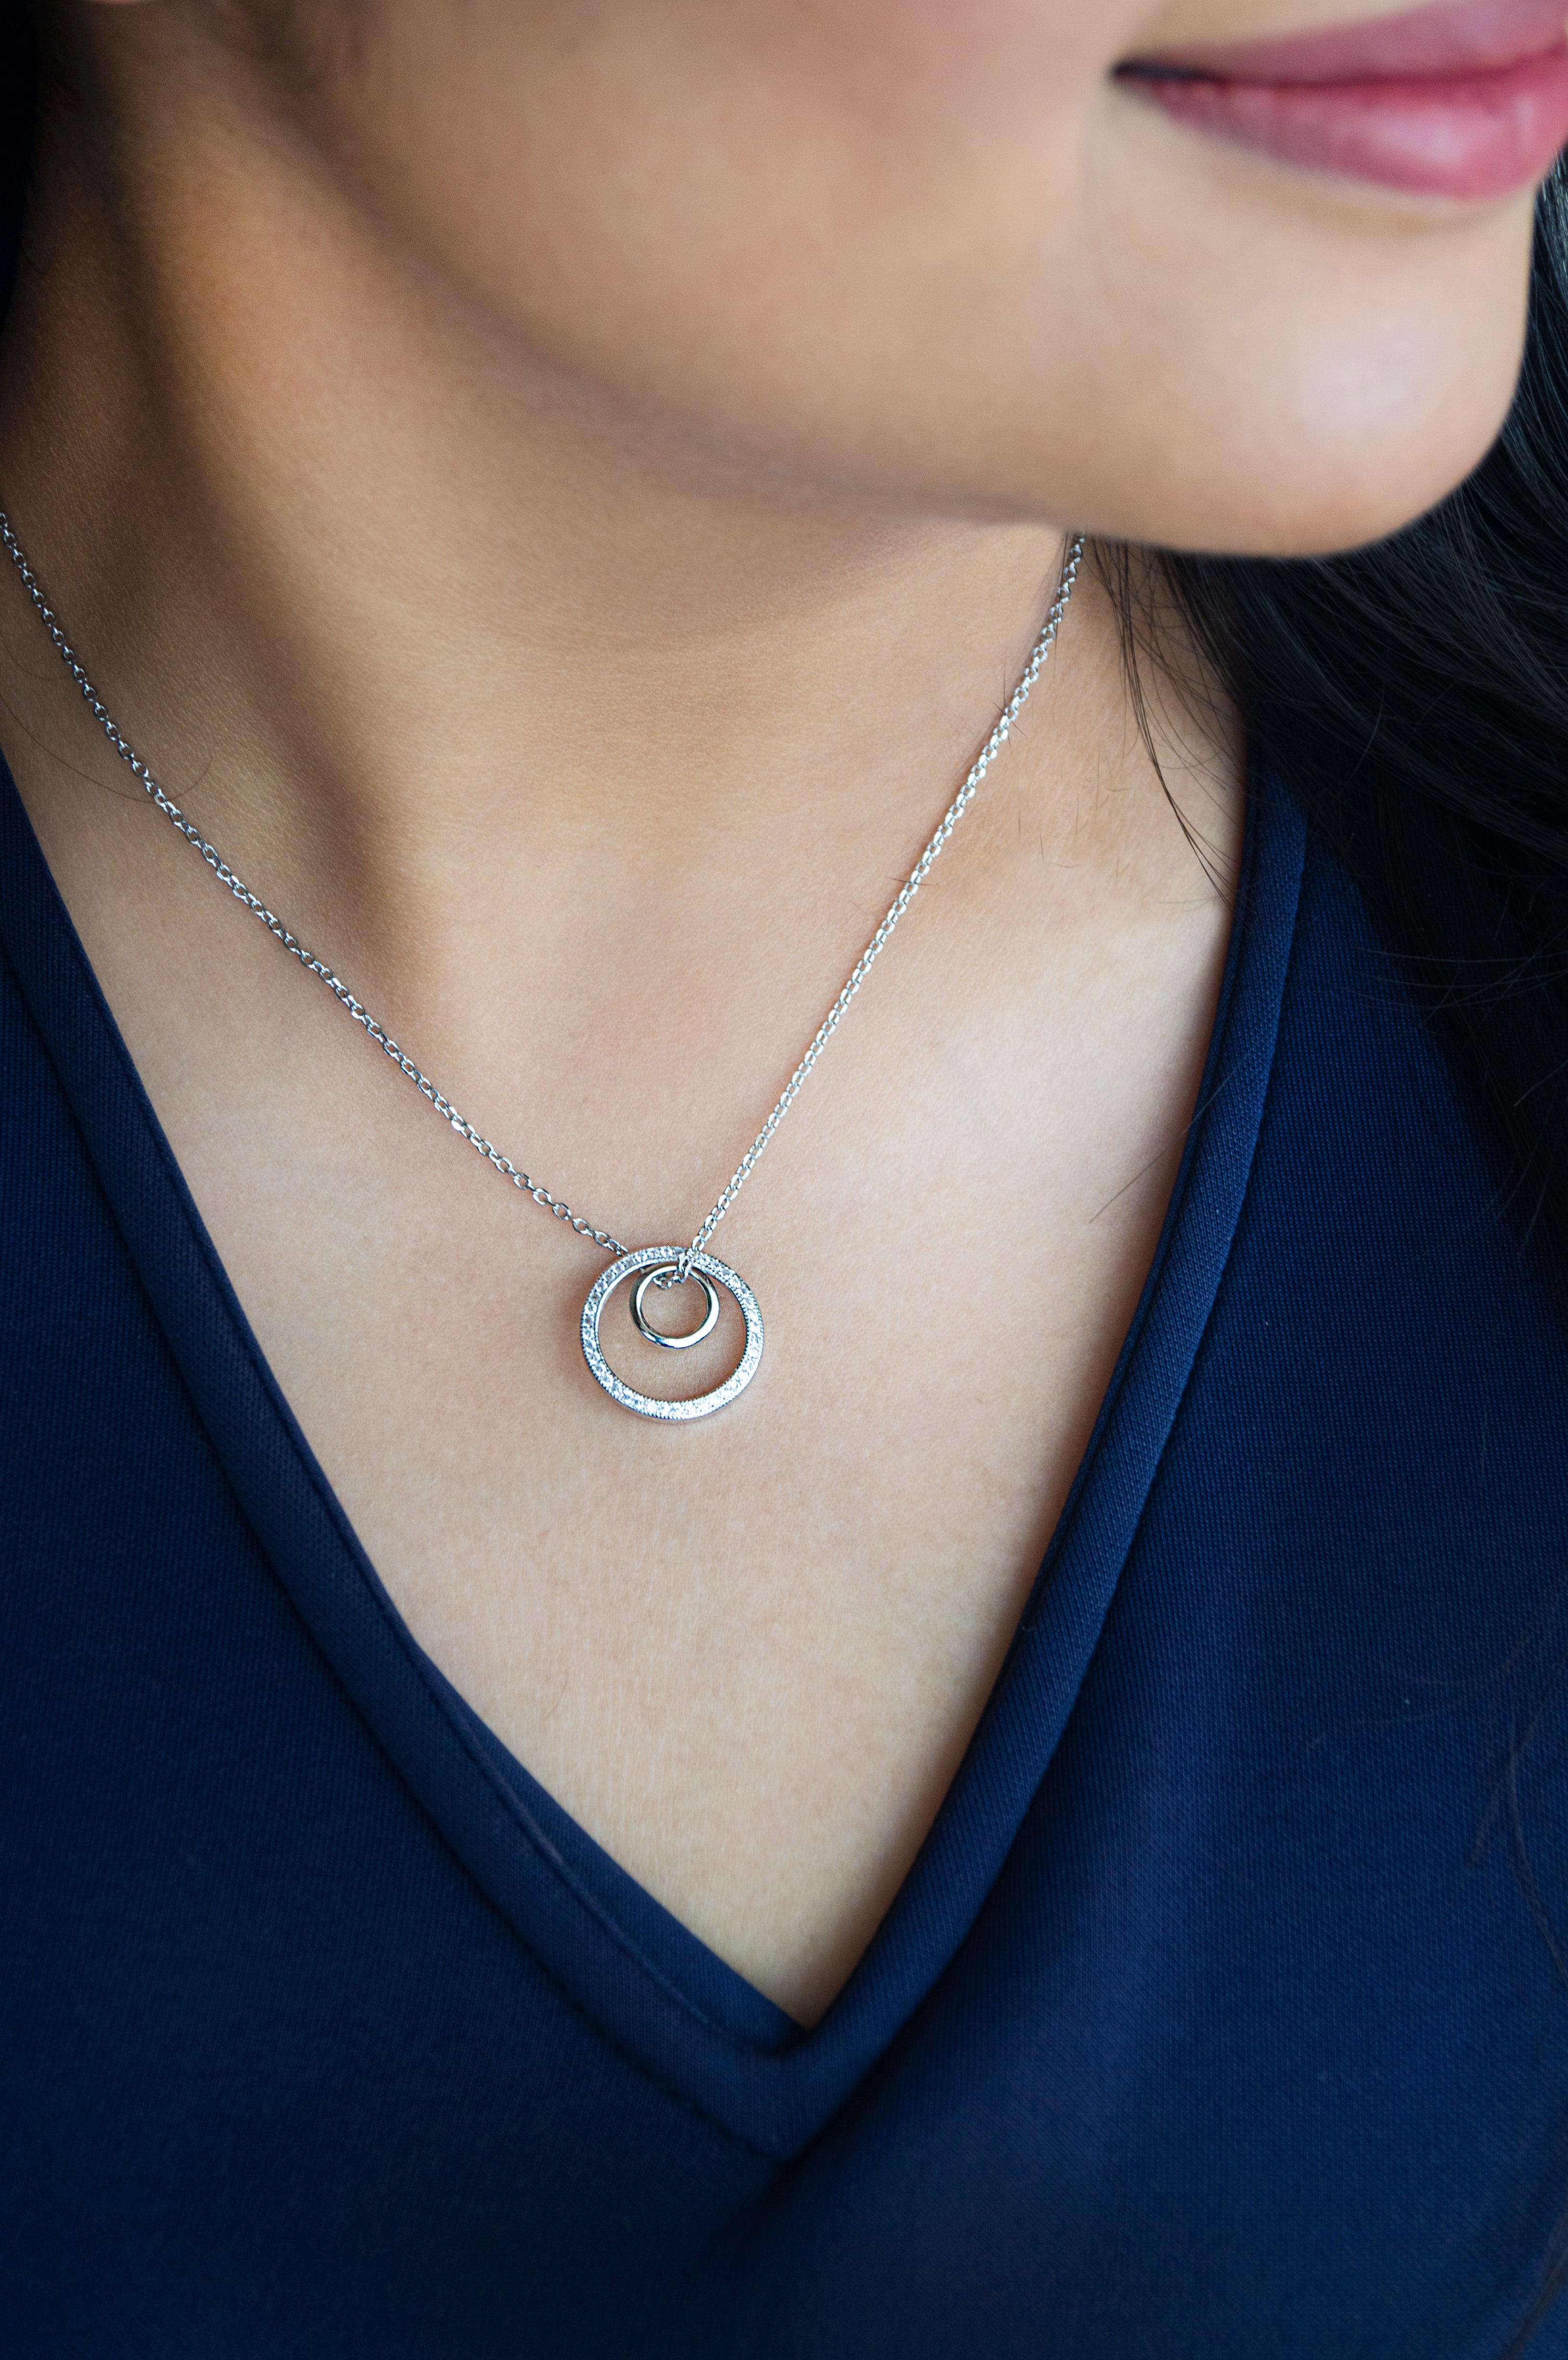 Medium Five Circle Cluster Necklace| Mixed Metal Silver & Gold | Lila Clare  Jewelry